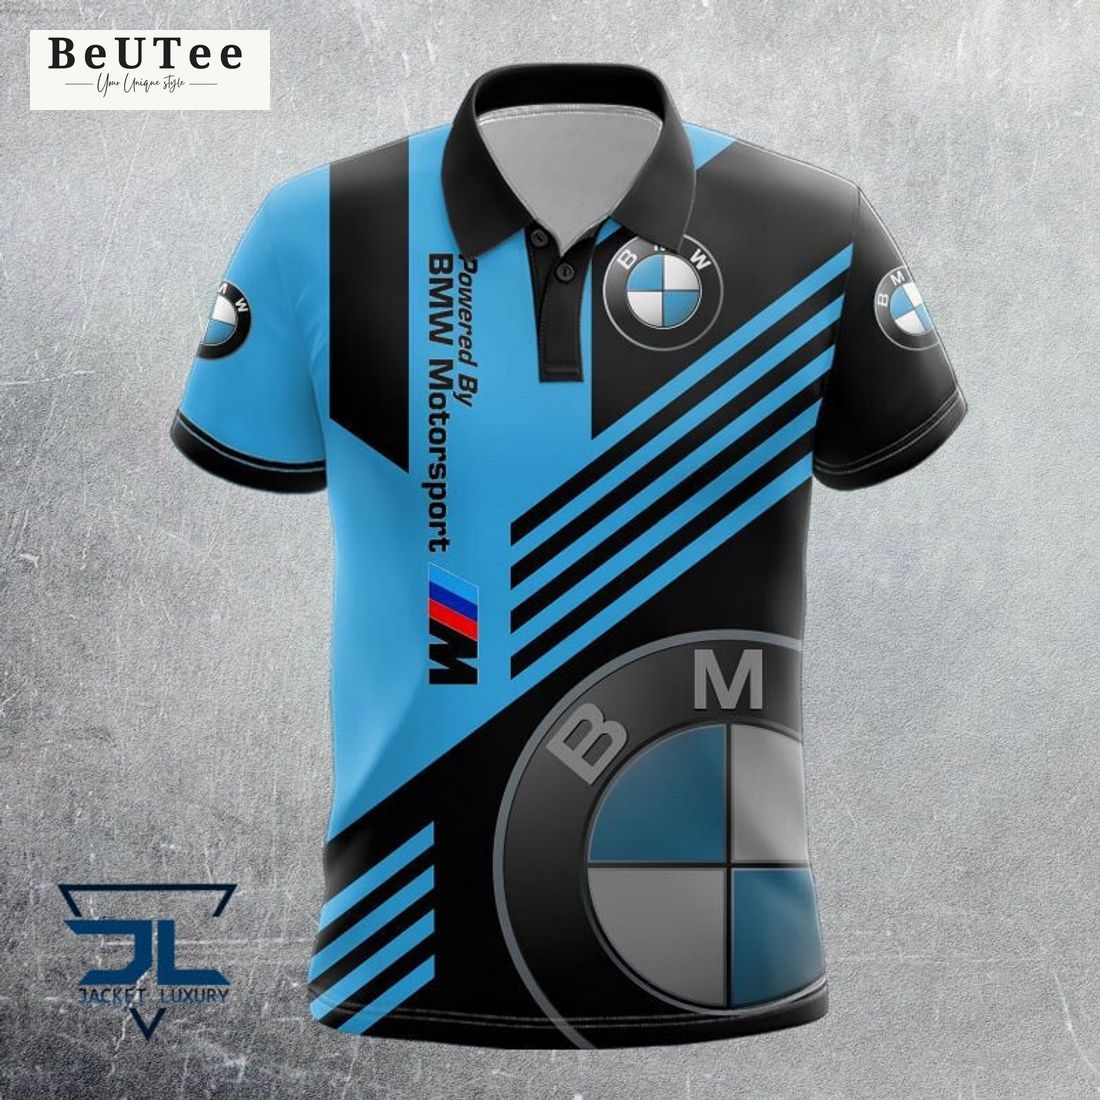 BMW Motorsport Car 3D Polo Tshirt Hey! Your profile picture is awesome